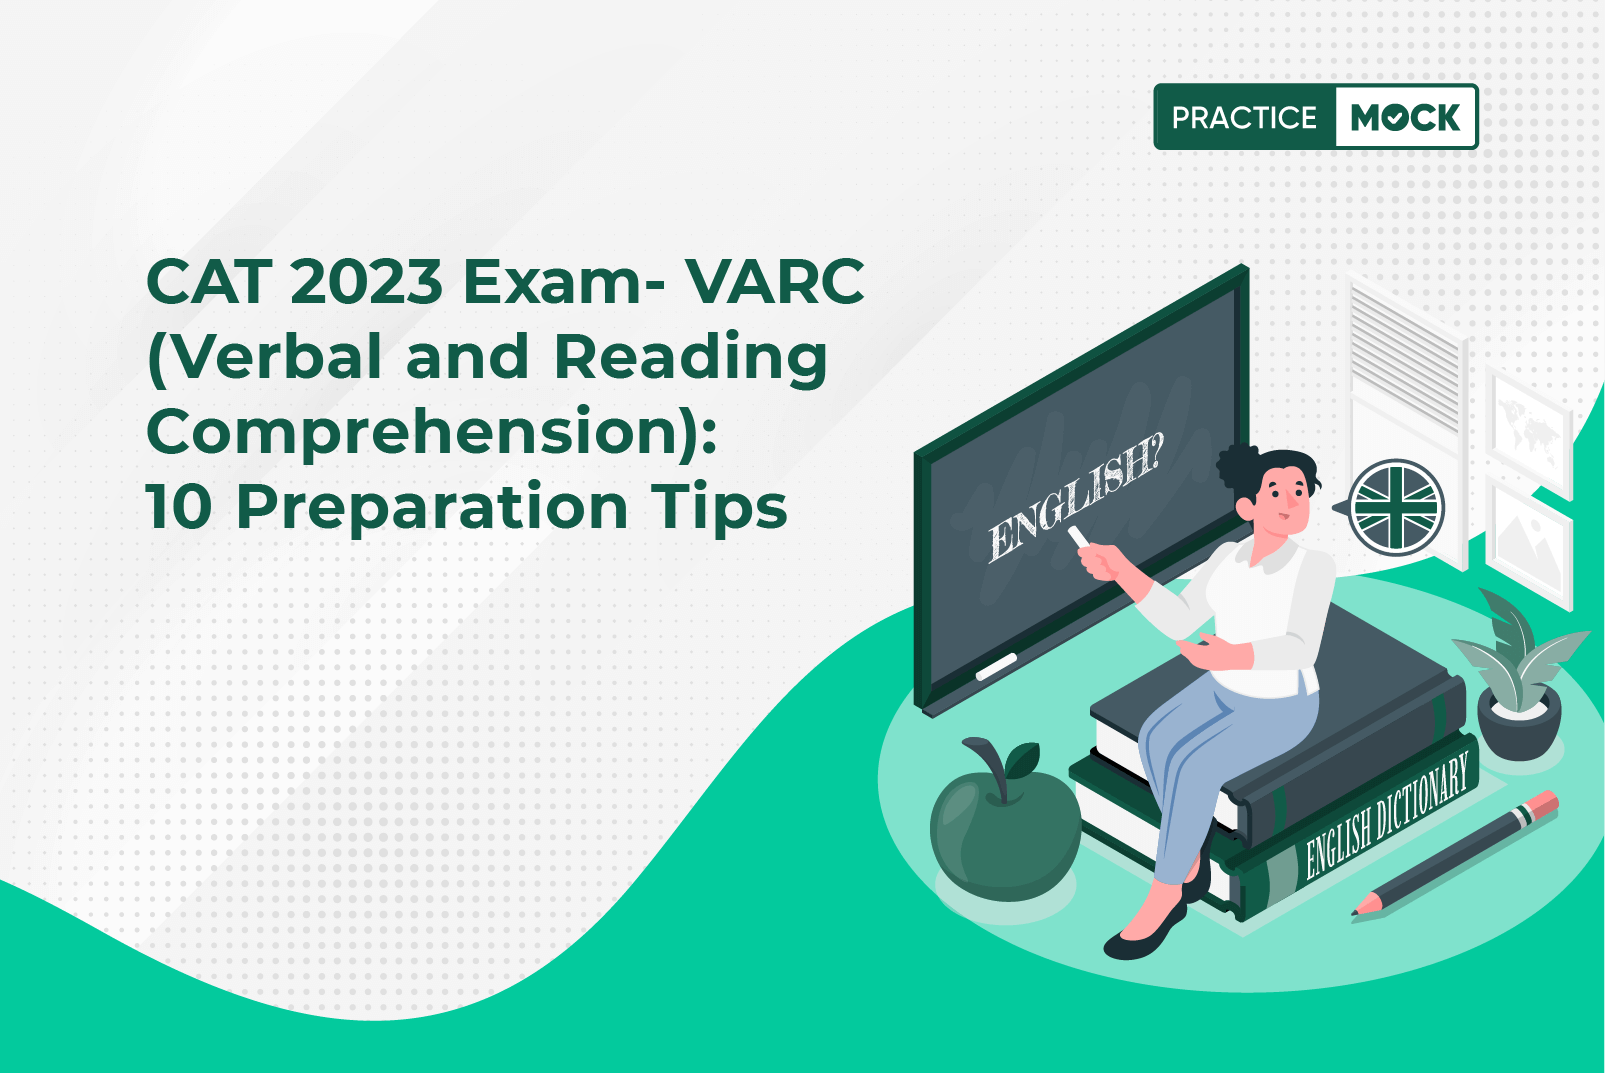 CAT 2023 Exam-VARC (Verbal and Reading Comprehension): 10 Preparation Tips